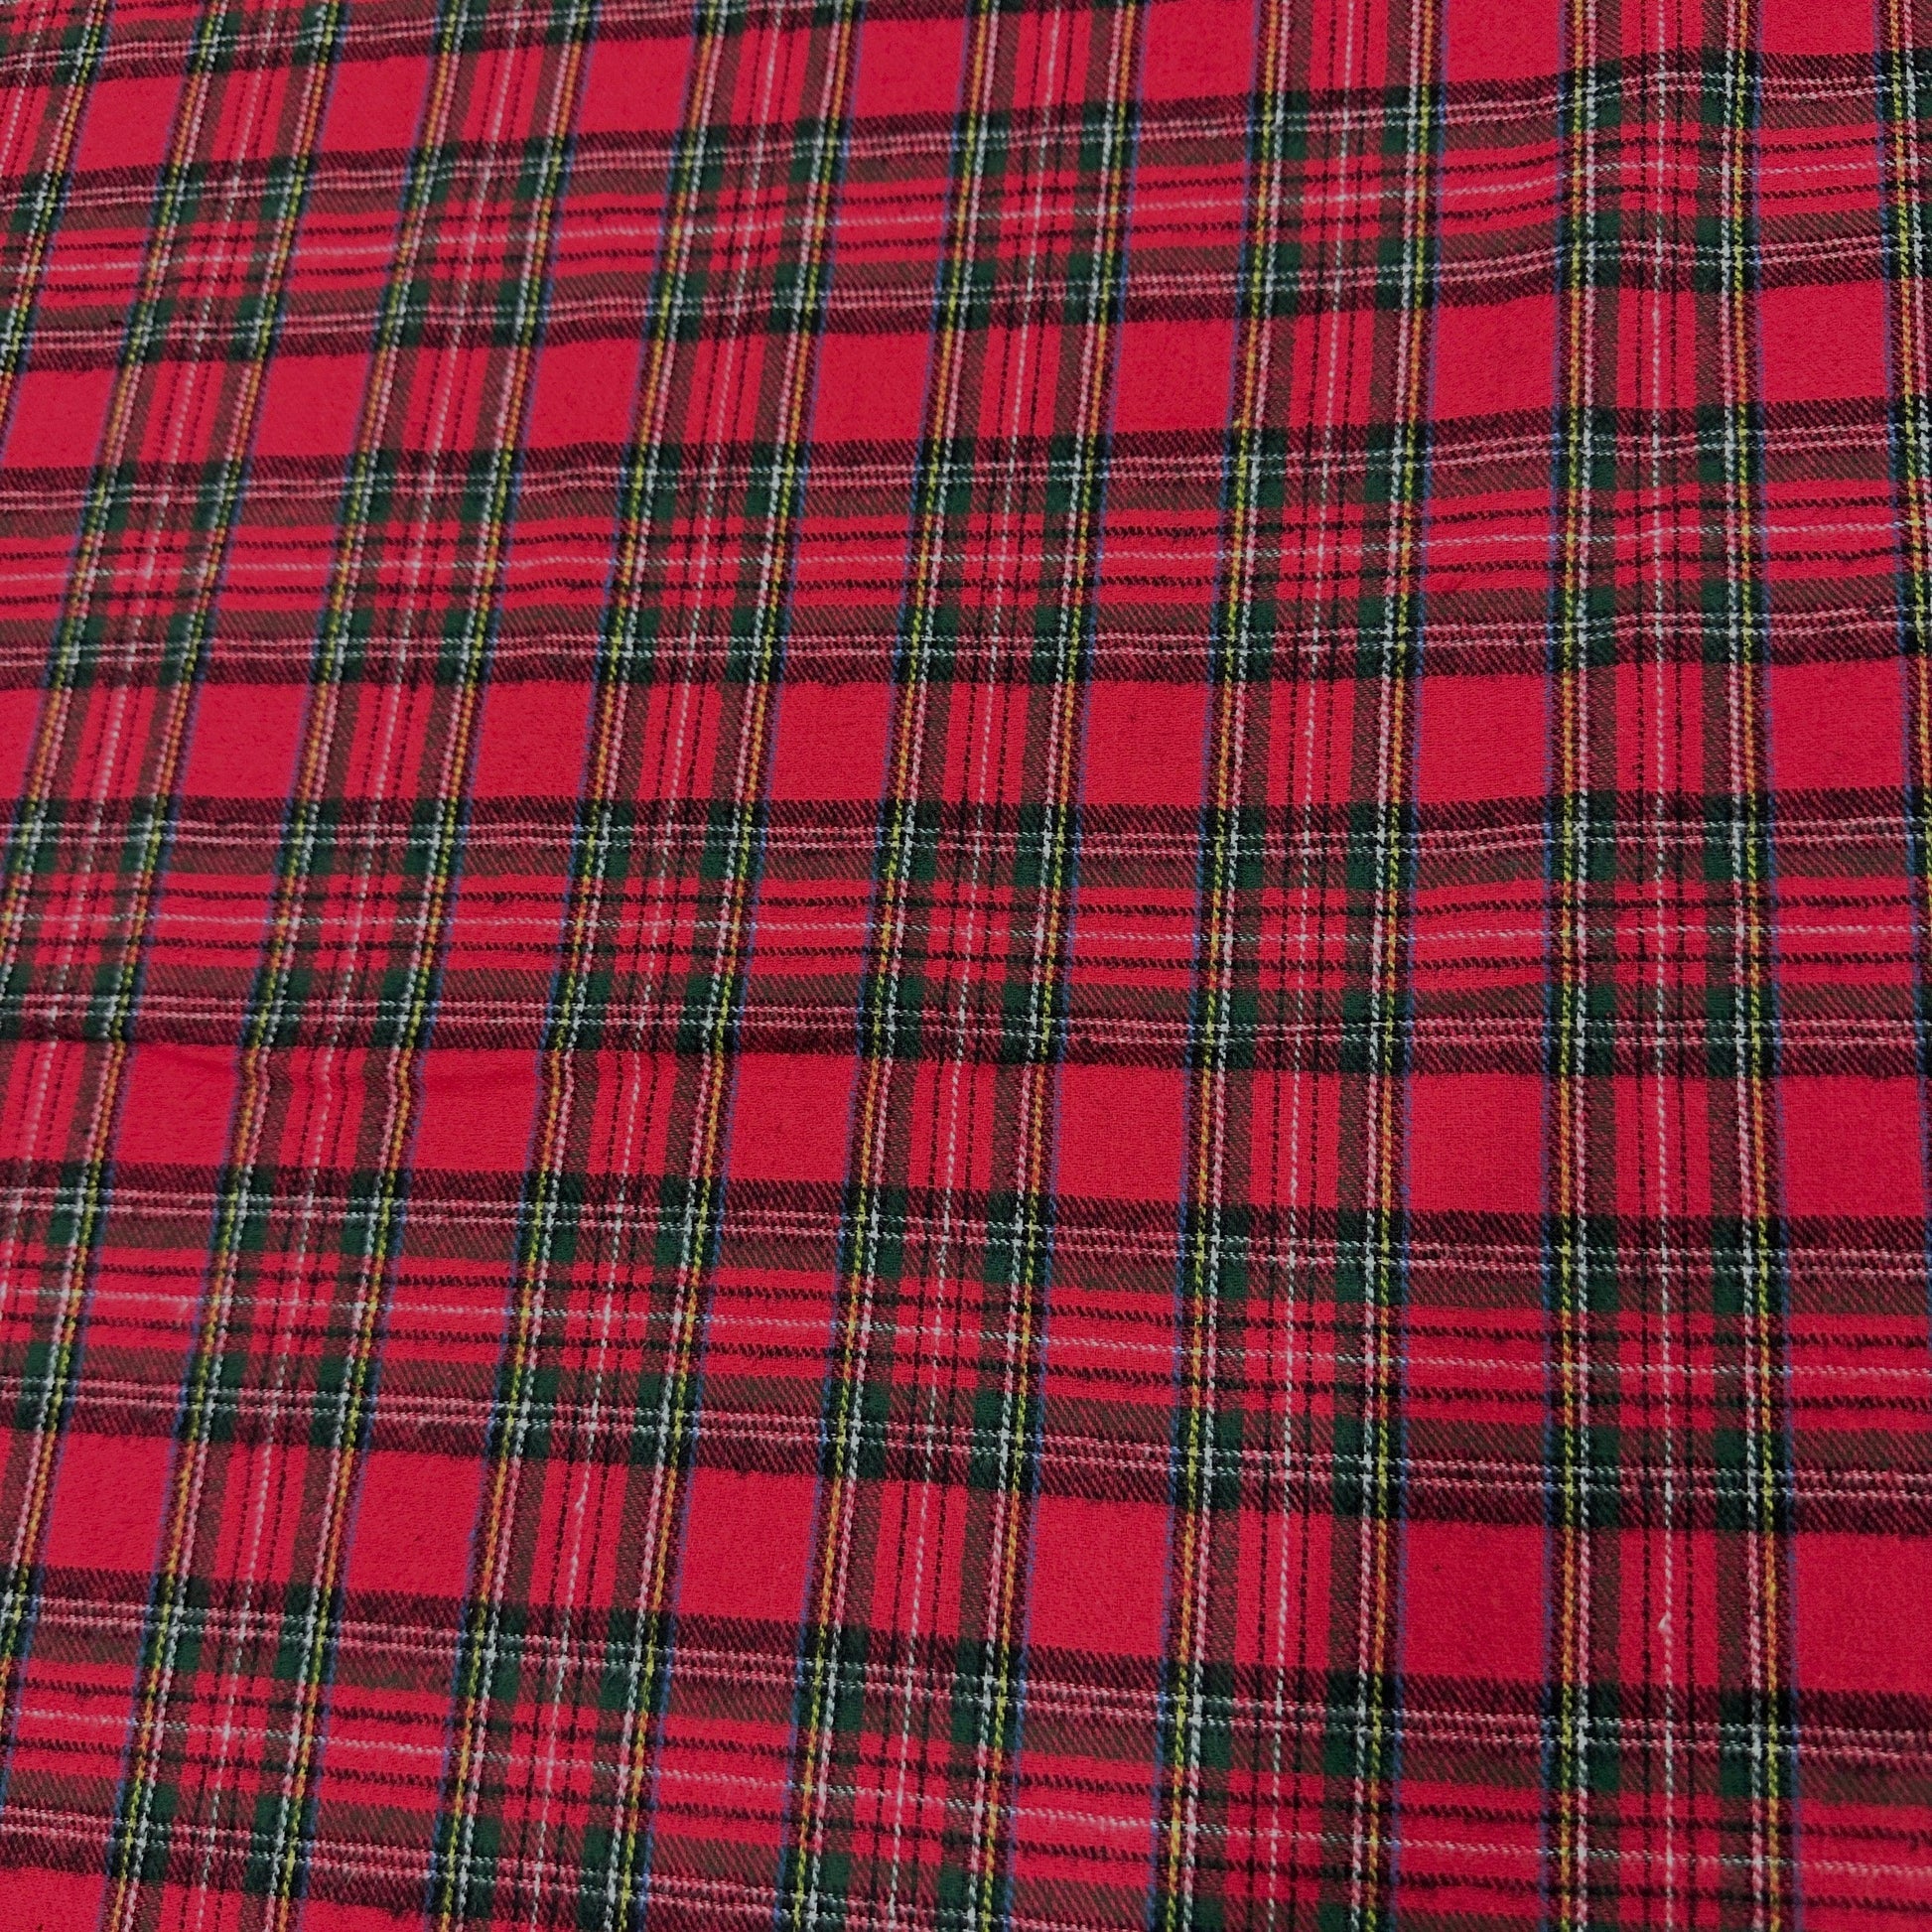 Cotton Flannel by the Yard - In Favorite Winter Plaids